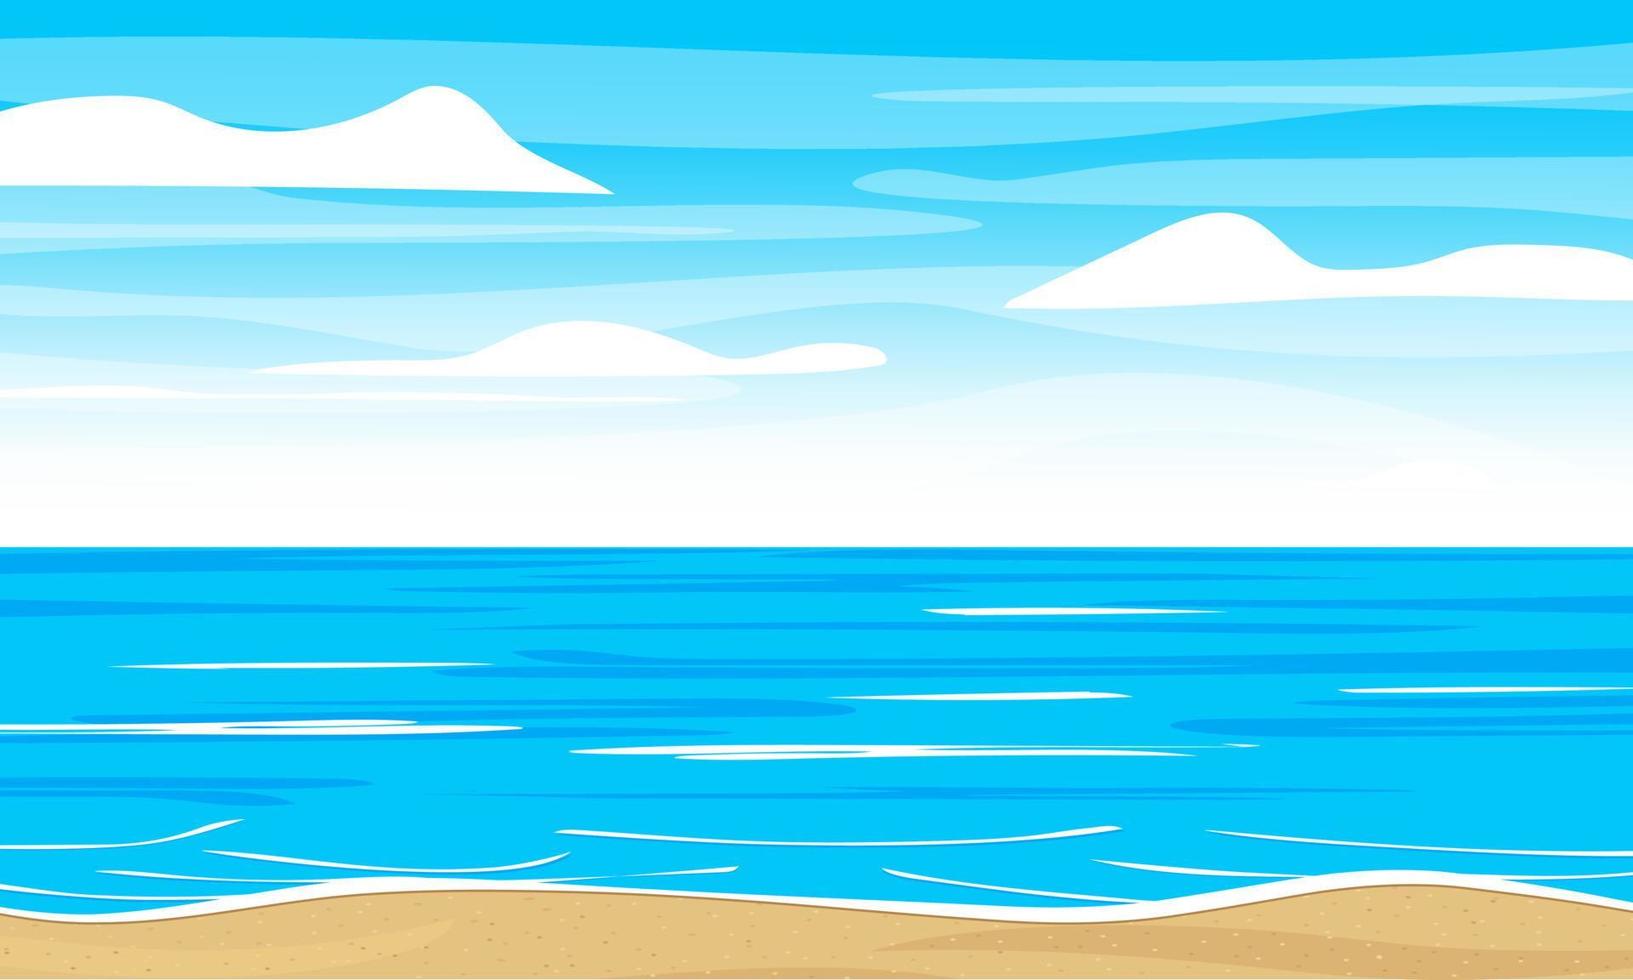 A beach scene with a blue sky and clouds. Ocean or sea landscape. Vector illustration.